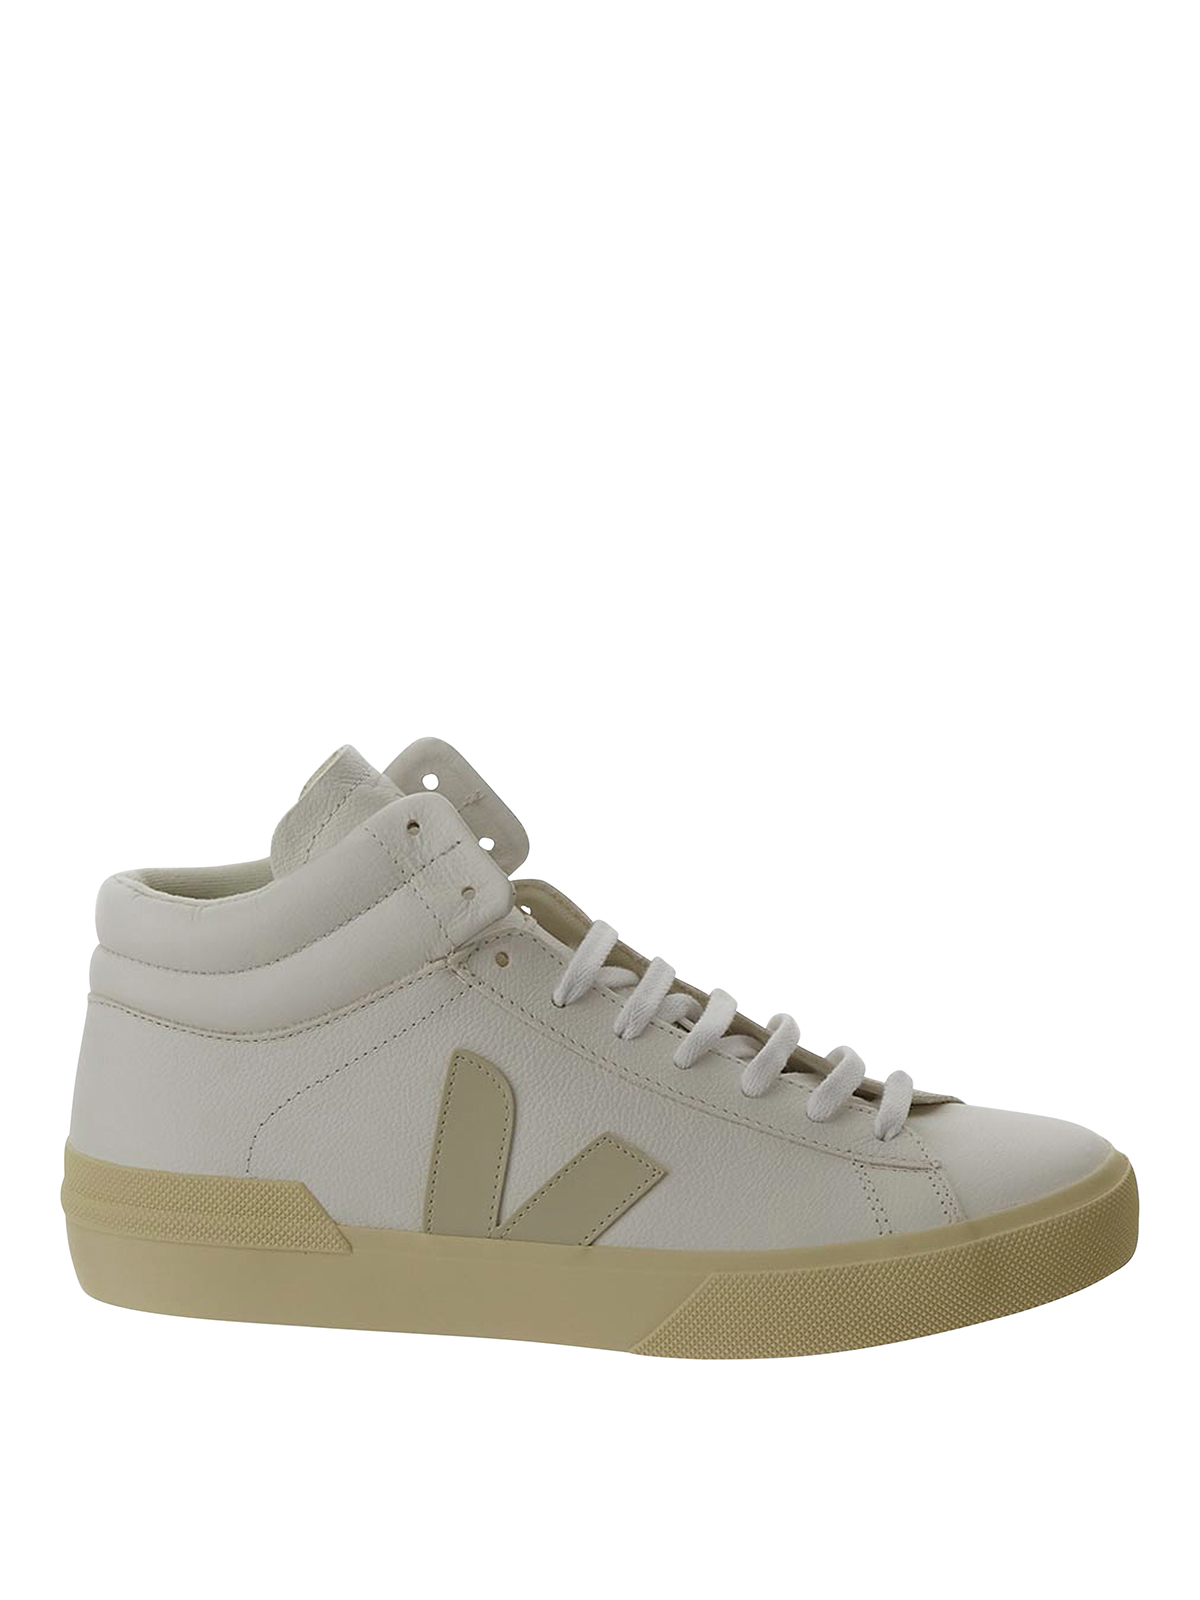 Veja Trainers In White